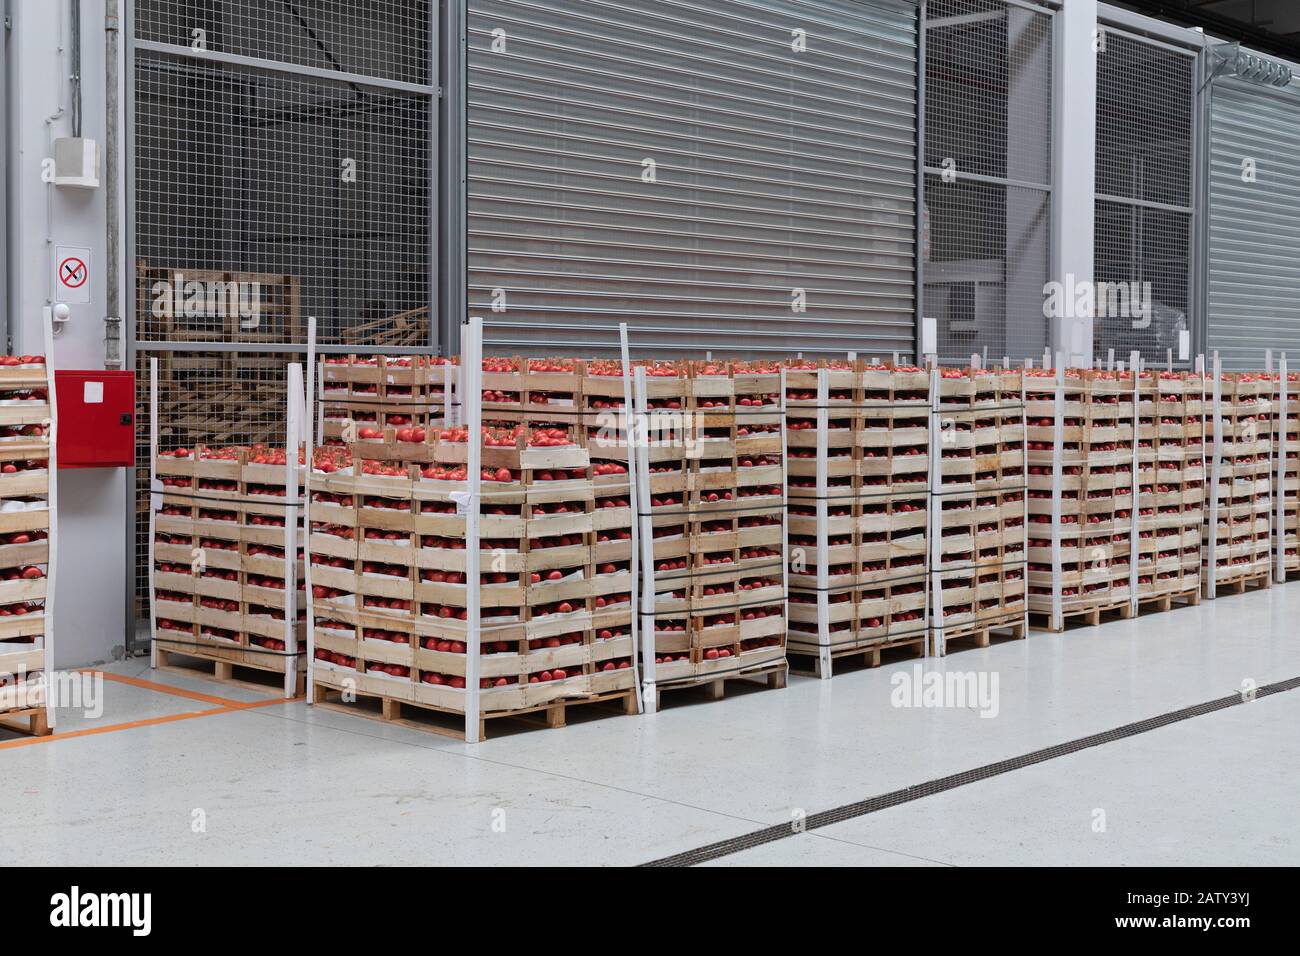 Crates of Tomatoes at Pallets in Warehouse Stock Photo